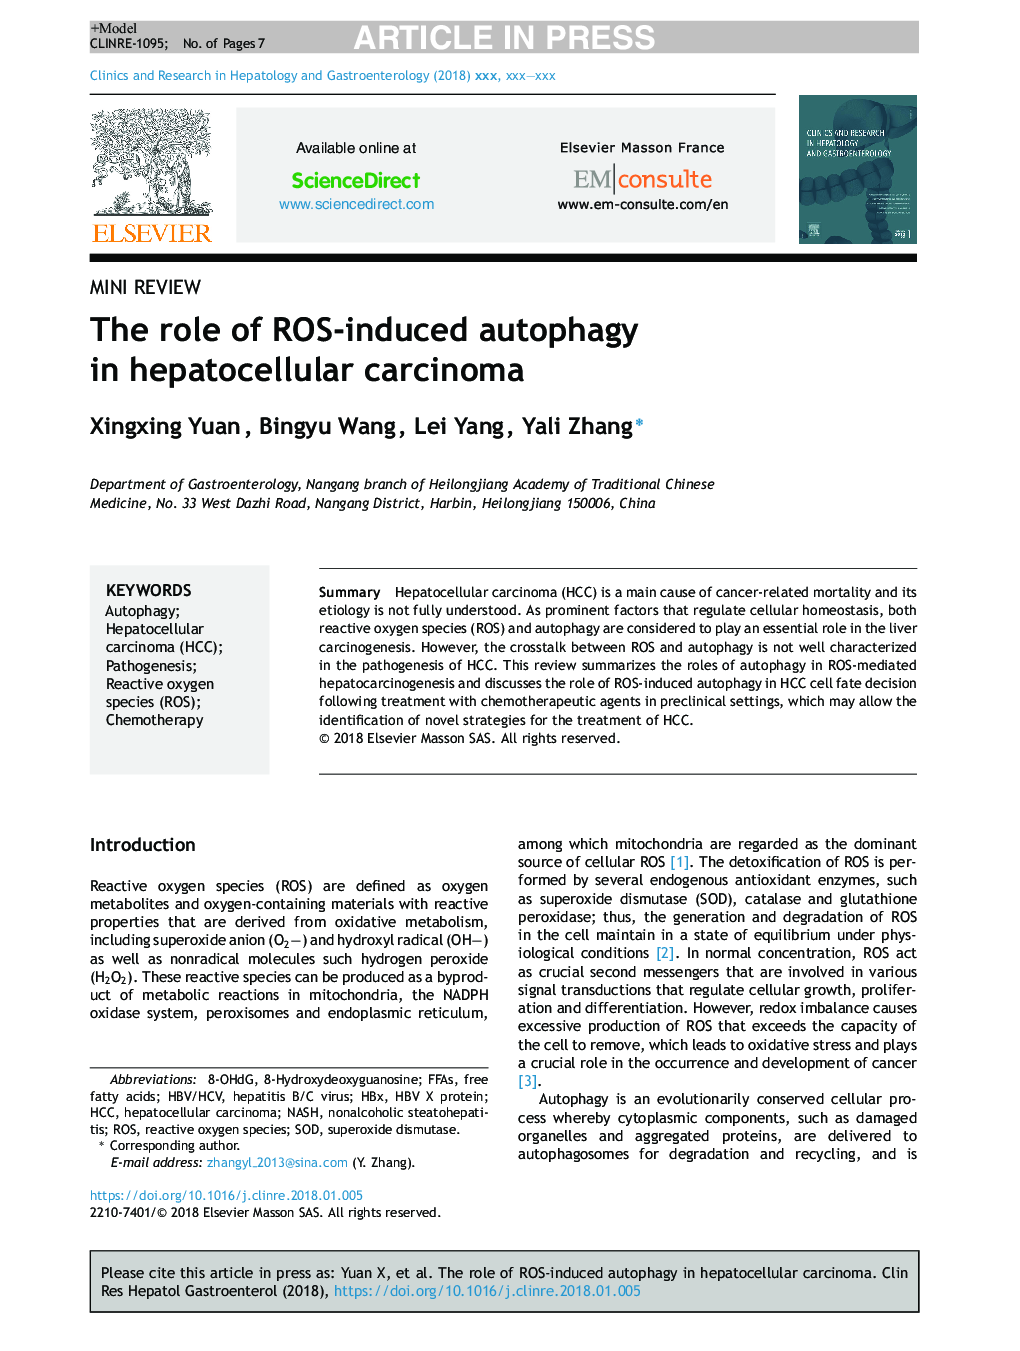 The role of ROS-induced autophagy in hepatocellular carcinoma